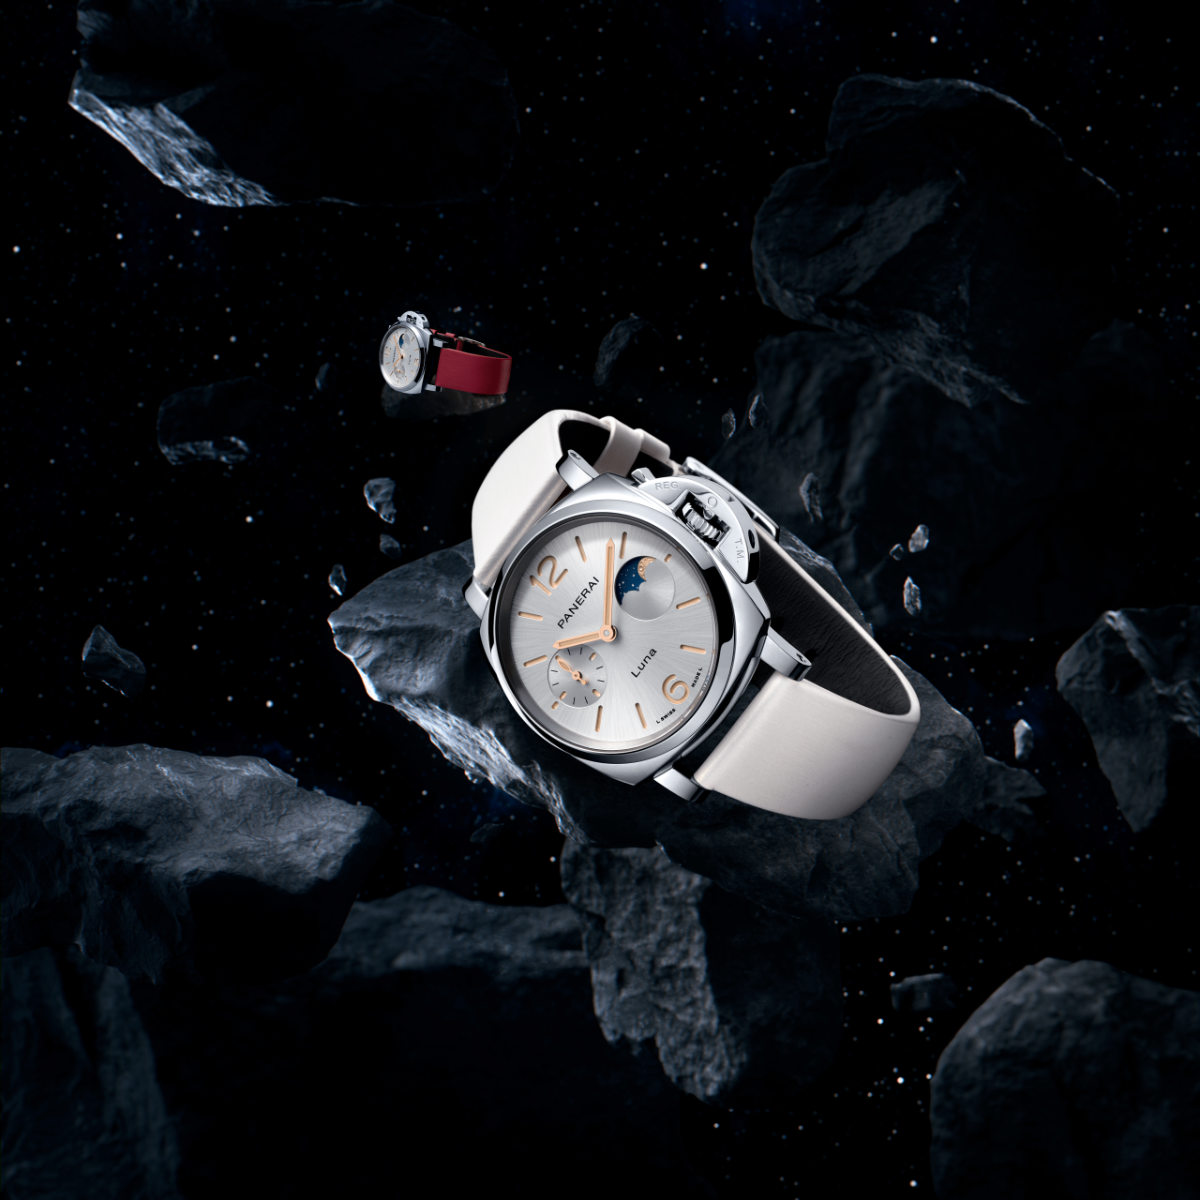 Luminor Due Luna Introduces The Moon Phase To A Signature Panerai Collection